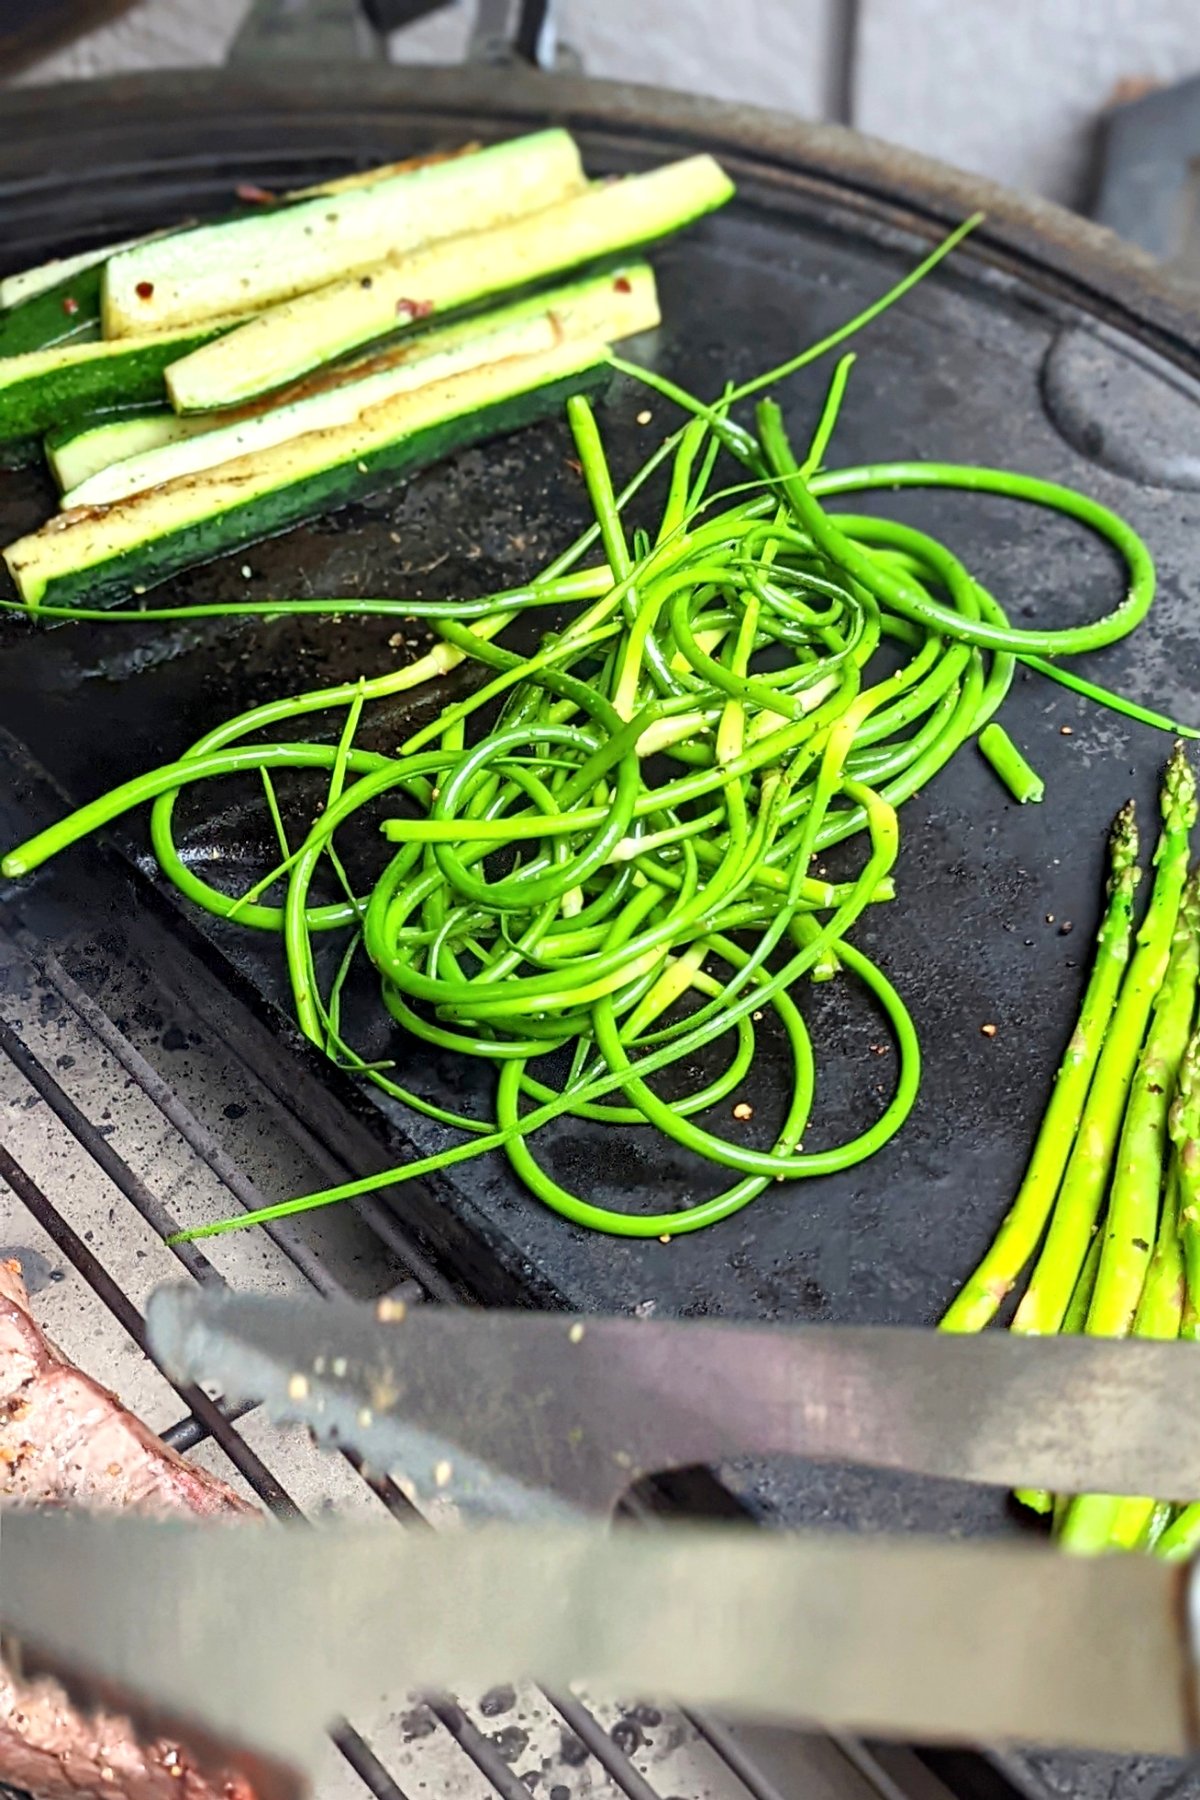 how to grill garlic scapes recipes on the grill easy charred and blackened scapes recipe from garlic sprouts dinner ideas.